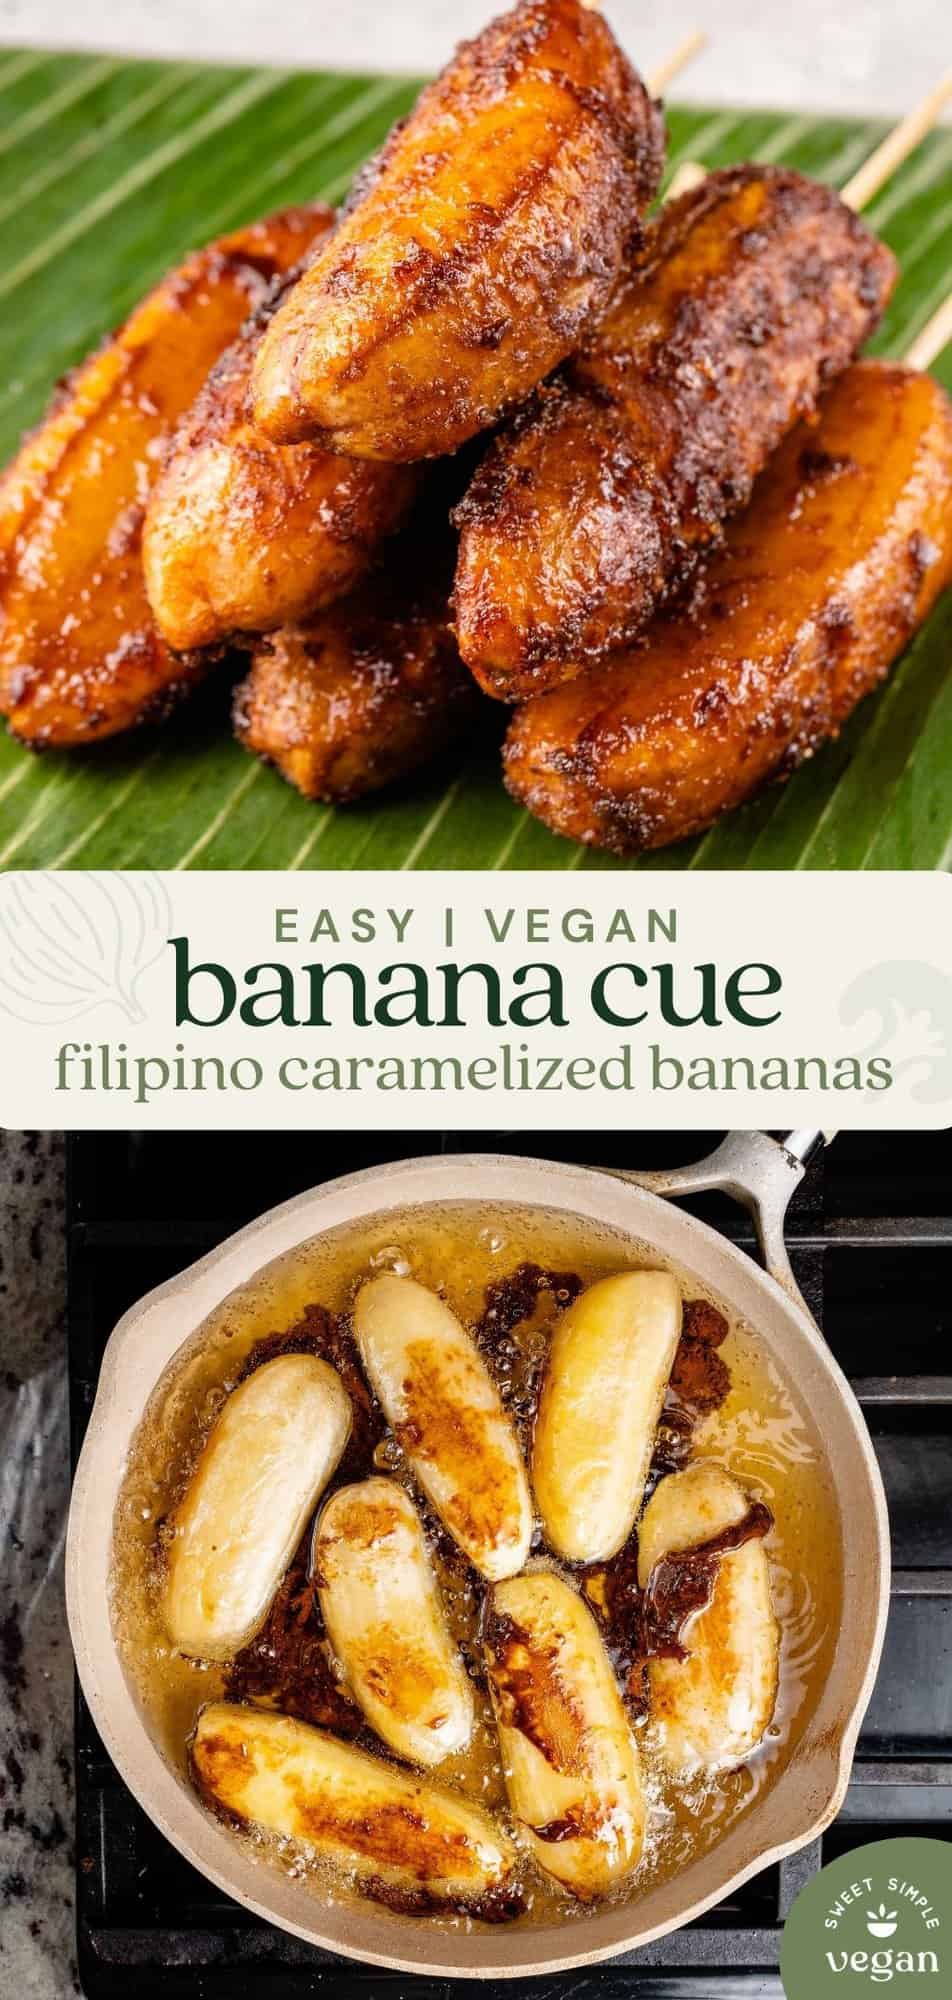 a photo of caramelized bananas on barbecue sticks laying on a banana leaf and an image of bananas being fried for pinterest